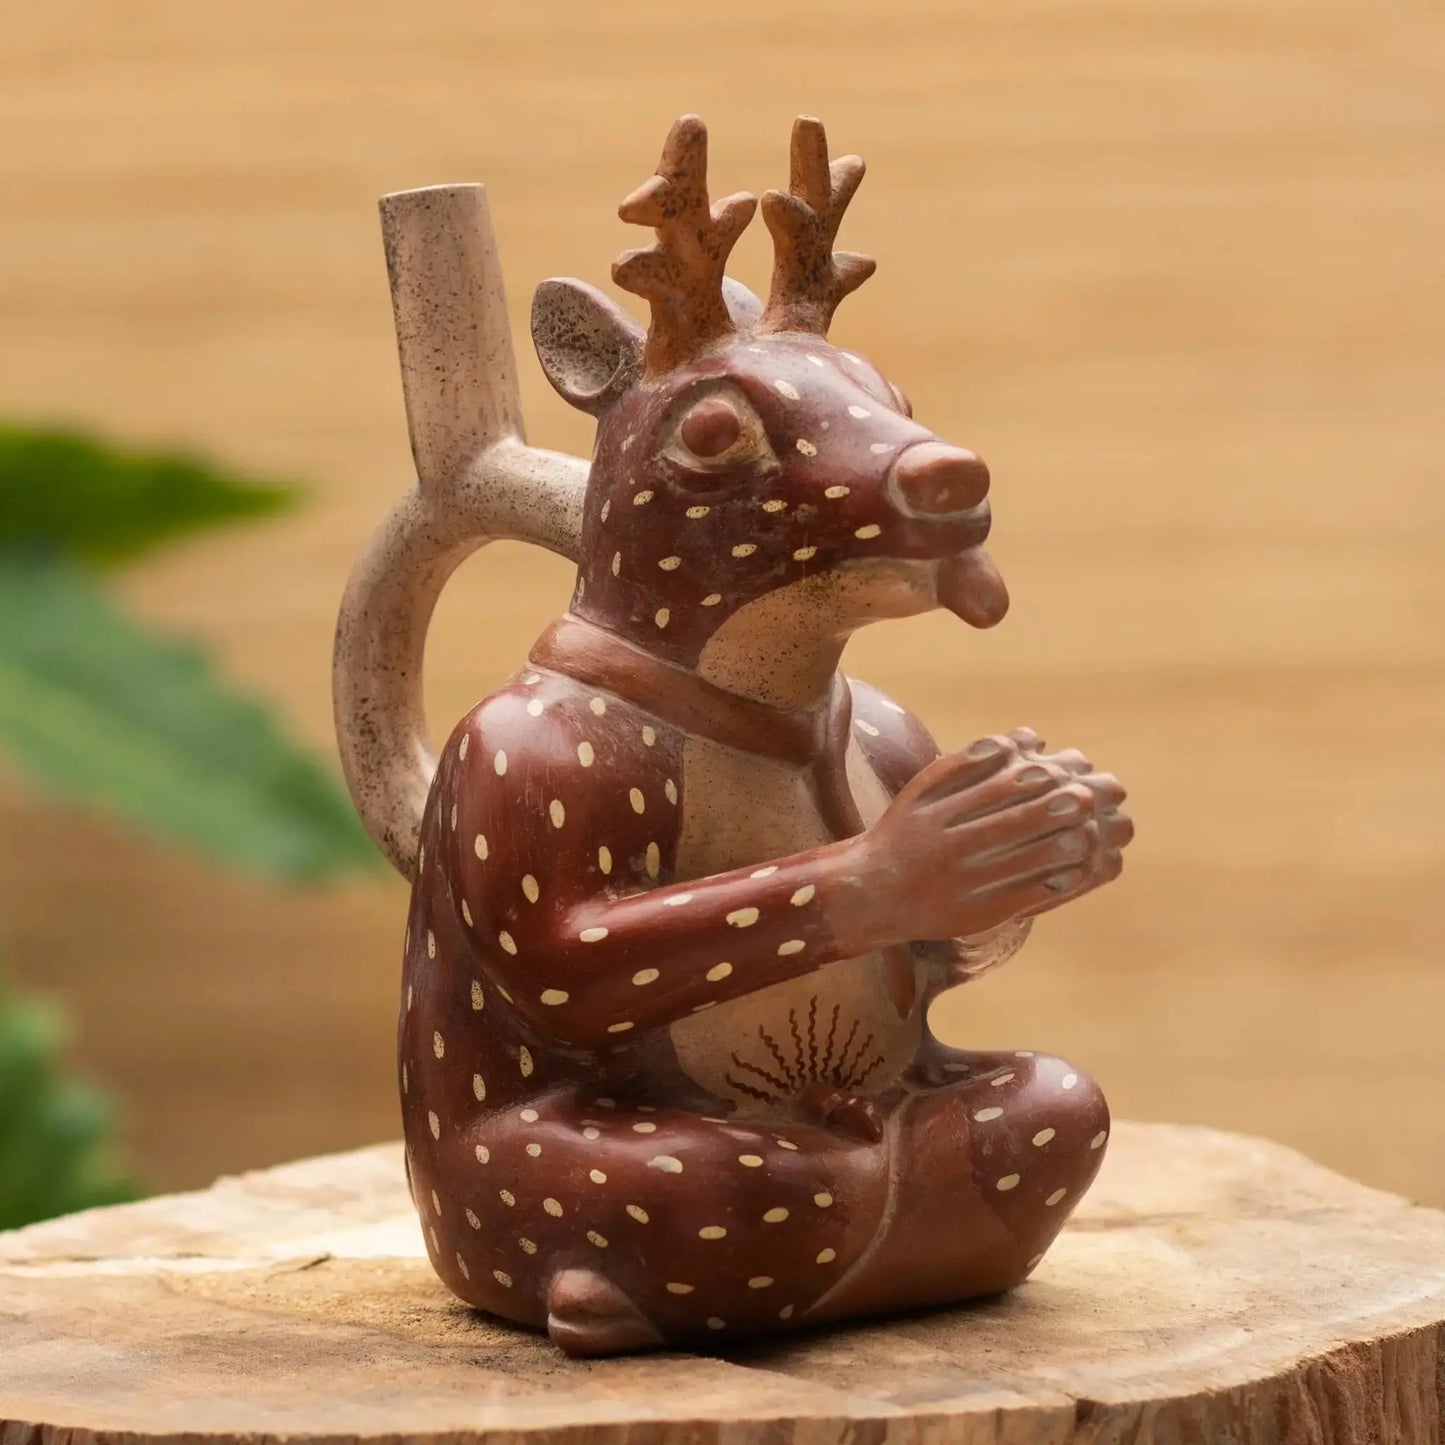 Young Moche Deer - Hand Crafted Peruvian Archaeological